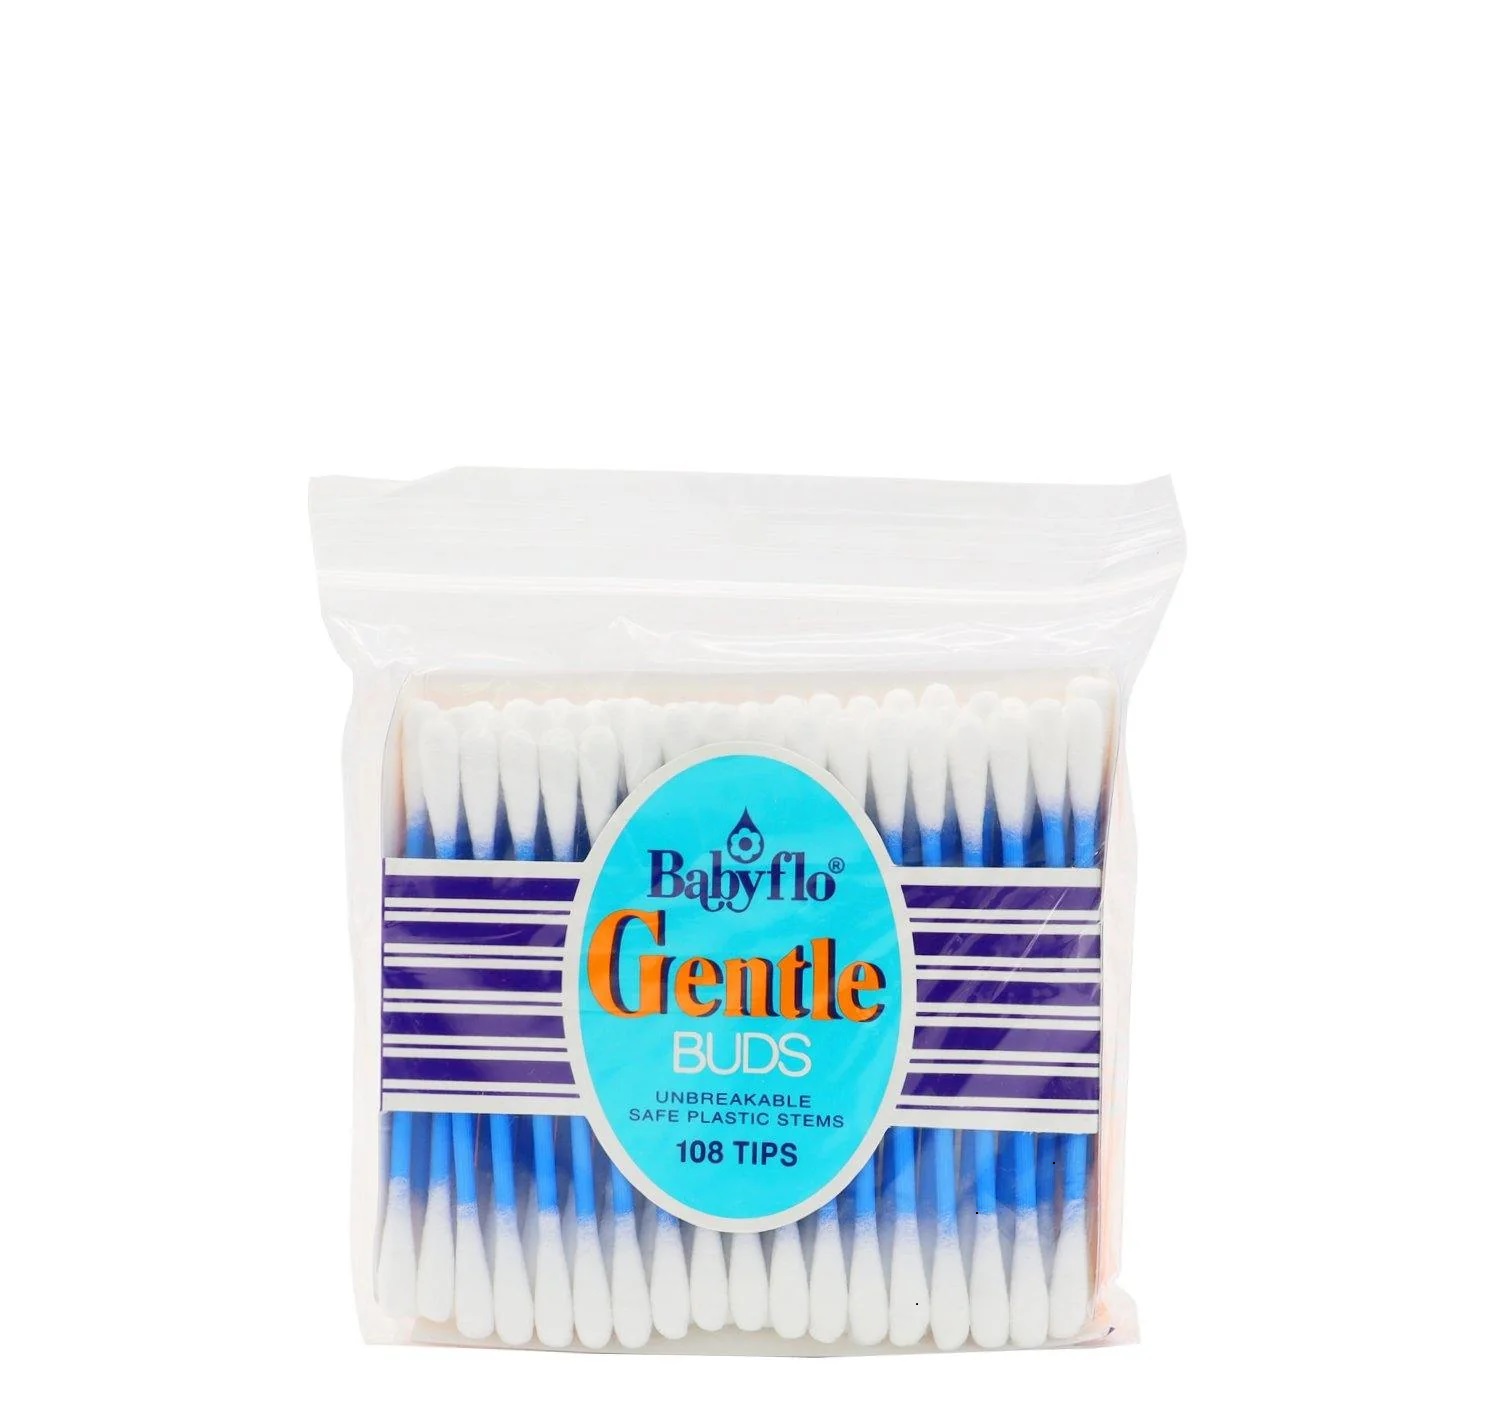 buy Babyflo Cotton Buds 108 's online at best price in philippines